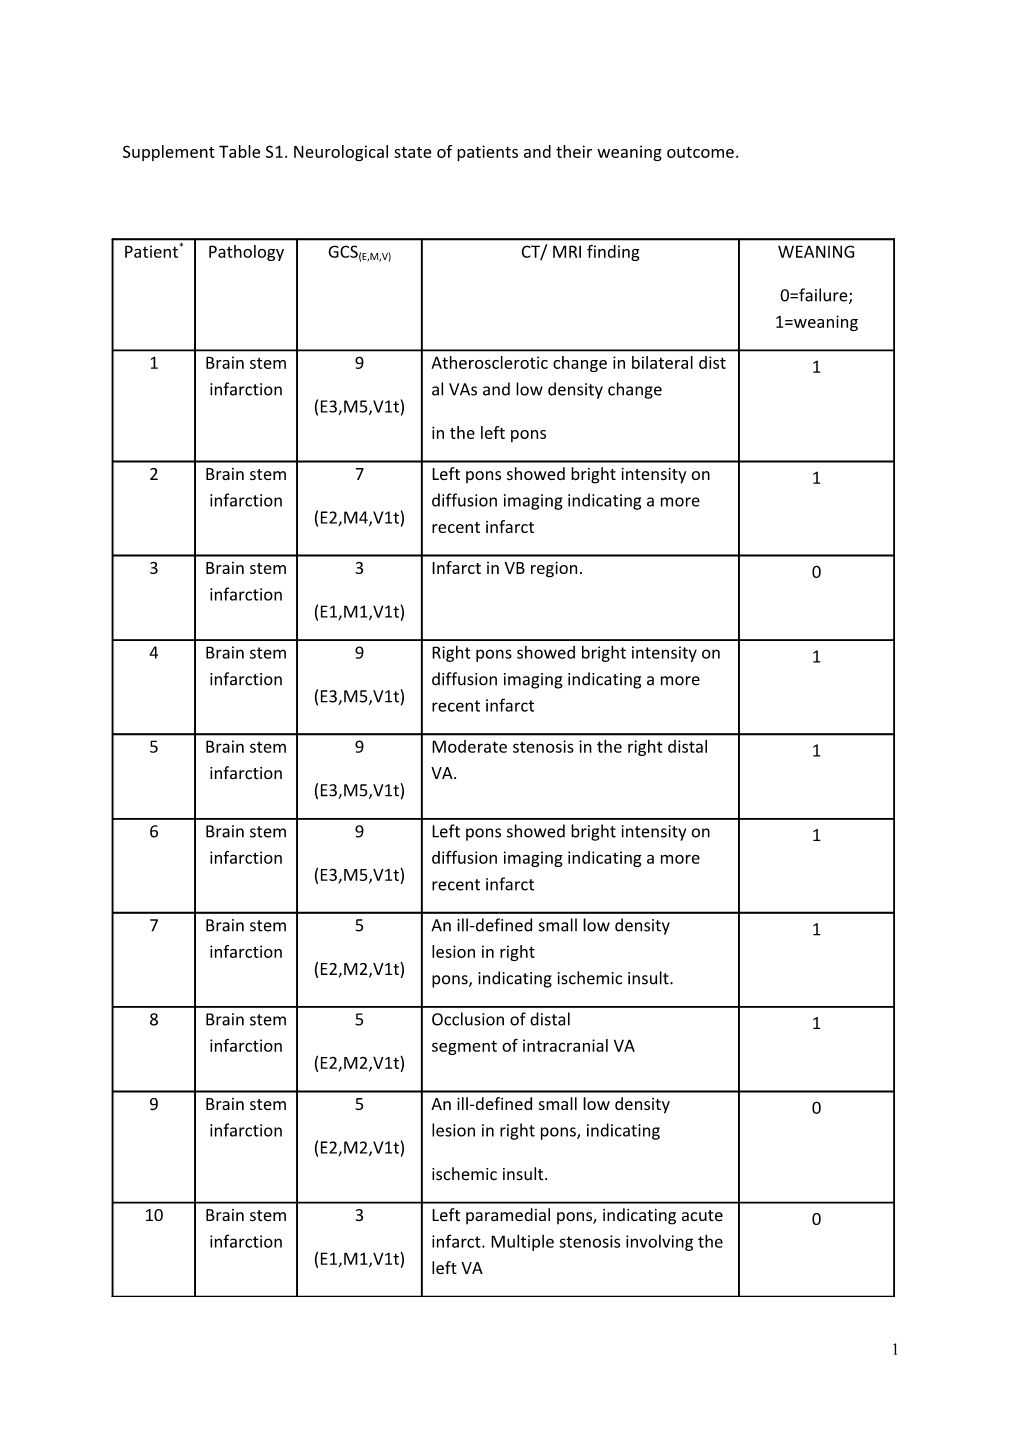 Supplement Table S1. Neurologicalstate of Patients and Their Weaning Outcome